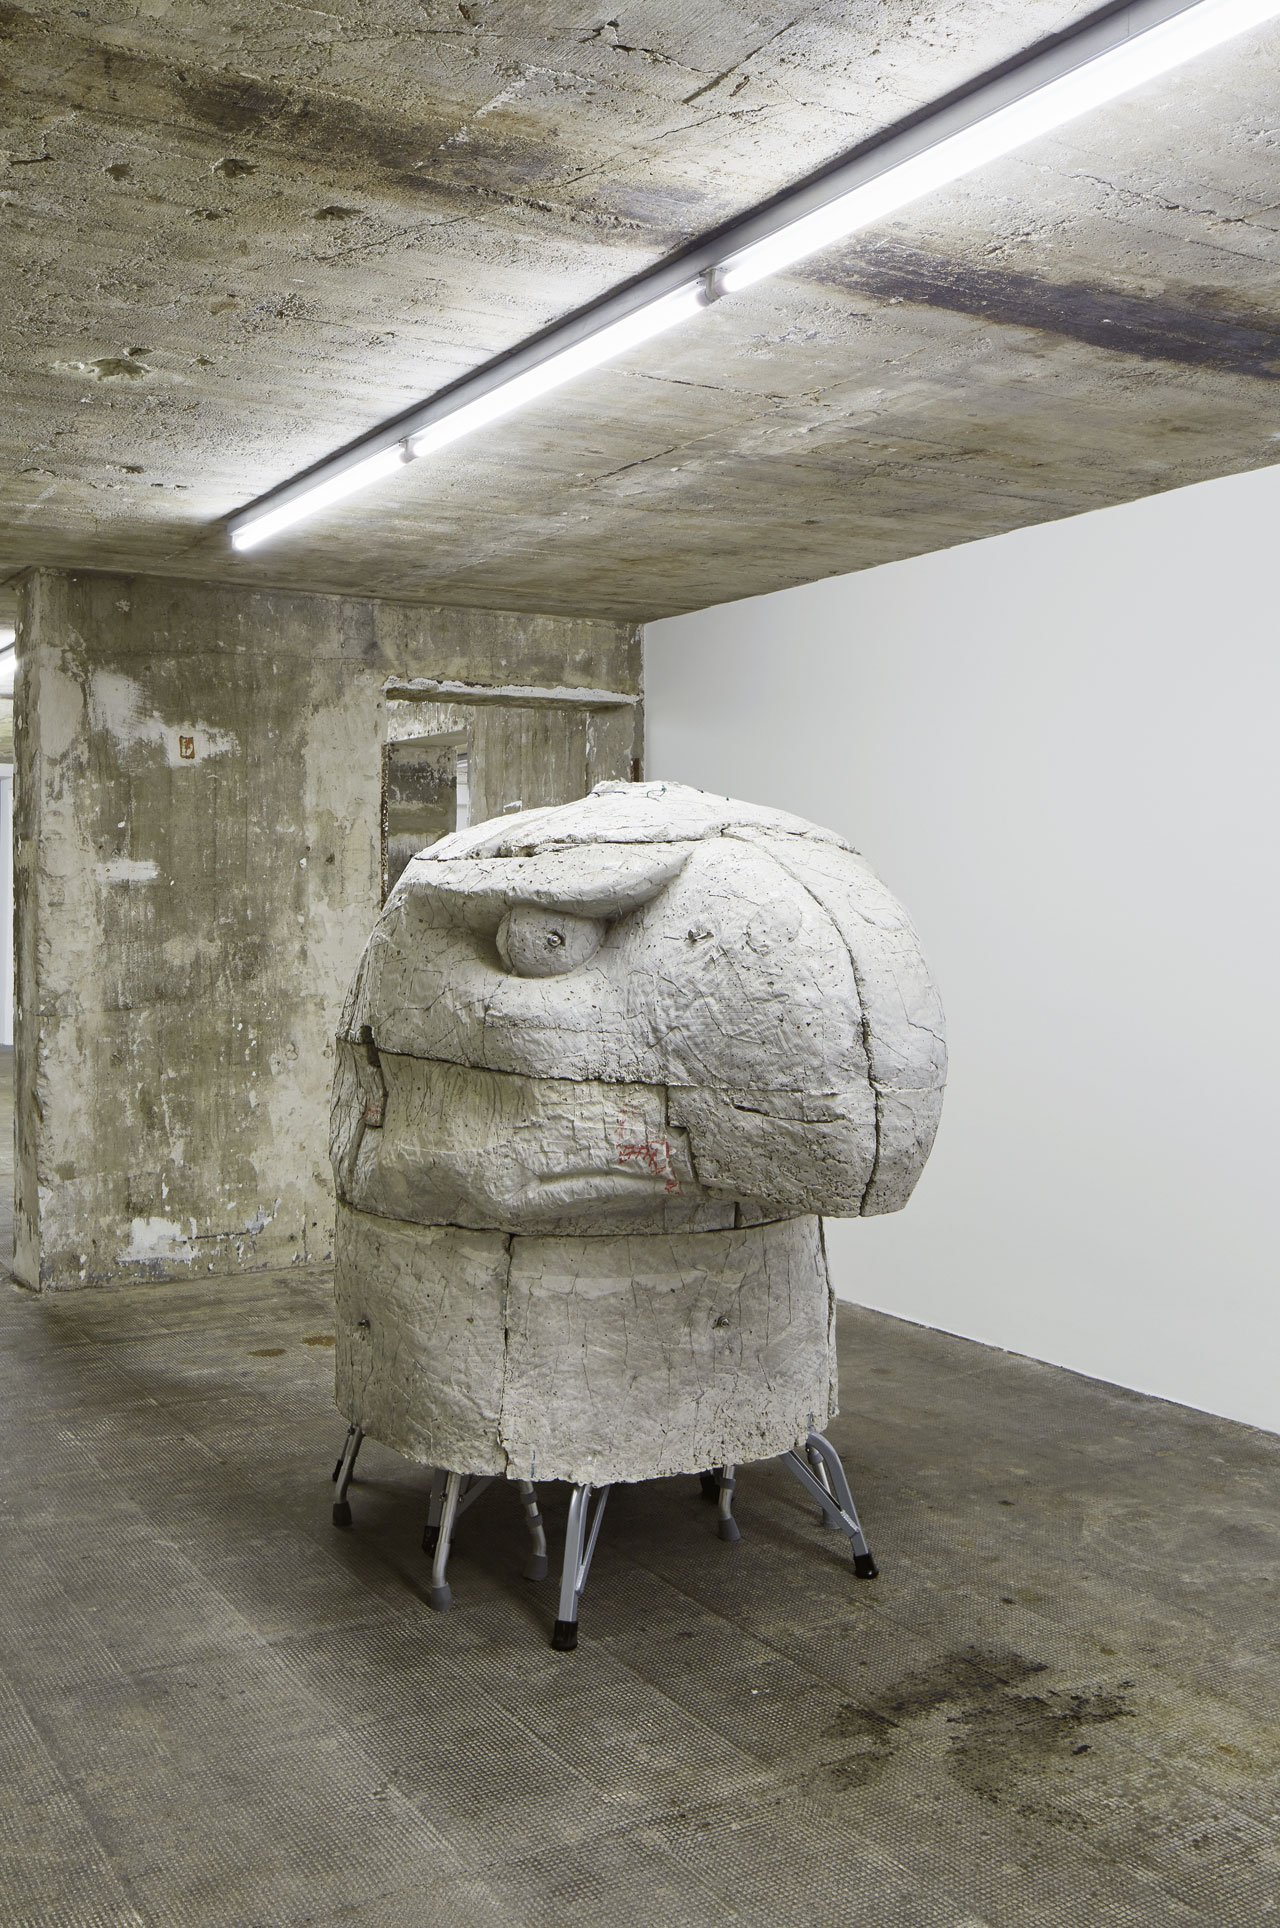 Justin Matherly, A concern altering pure feature (e.t.s.p.n.g.l.) (2013) | Reinforced concrete, ambulatory equipment, stainless steel hardware, zip ties, spray paint, water based marker / 149 × 87 × 164,5 cm / Boros Collection, Berlin. Photo by NOSHE.